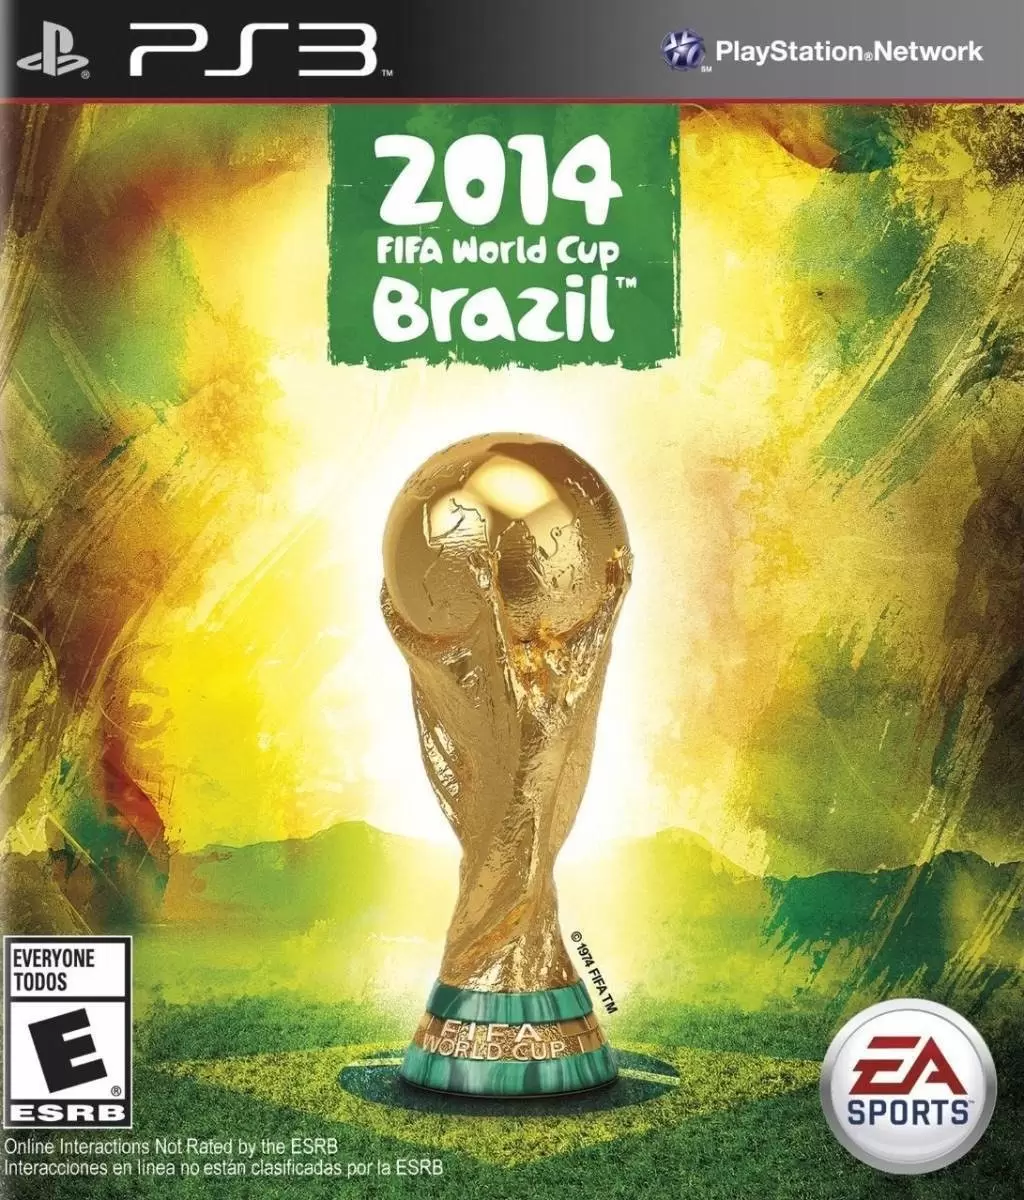 PS3 Games - 2014 FIFA World Cup Brazil